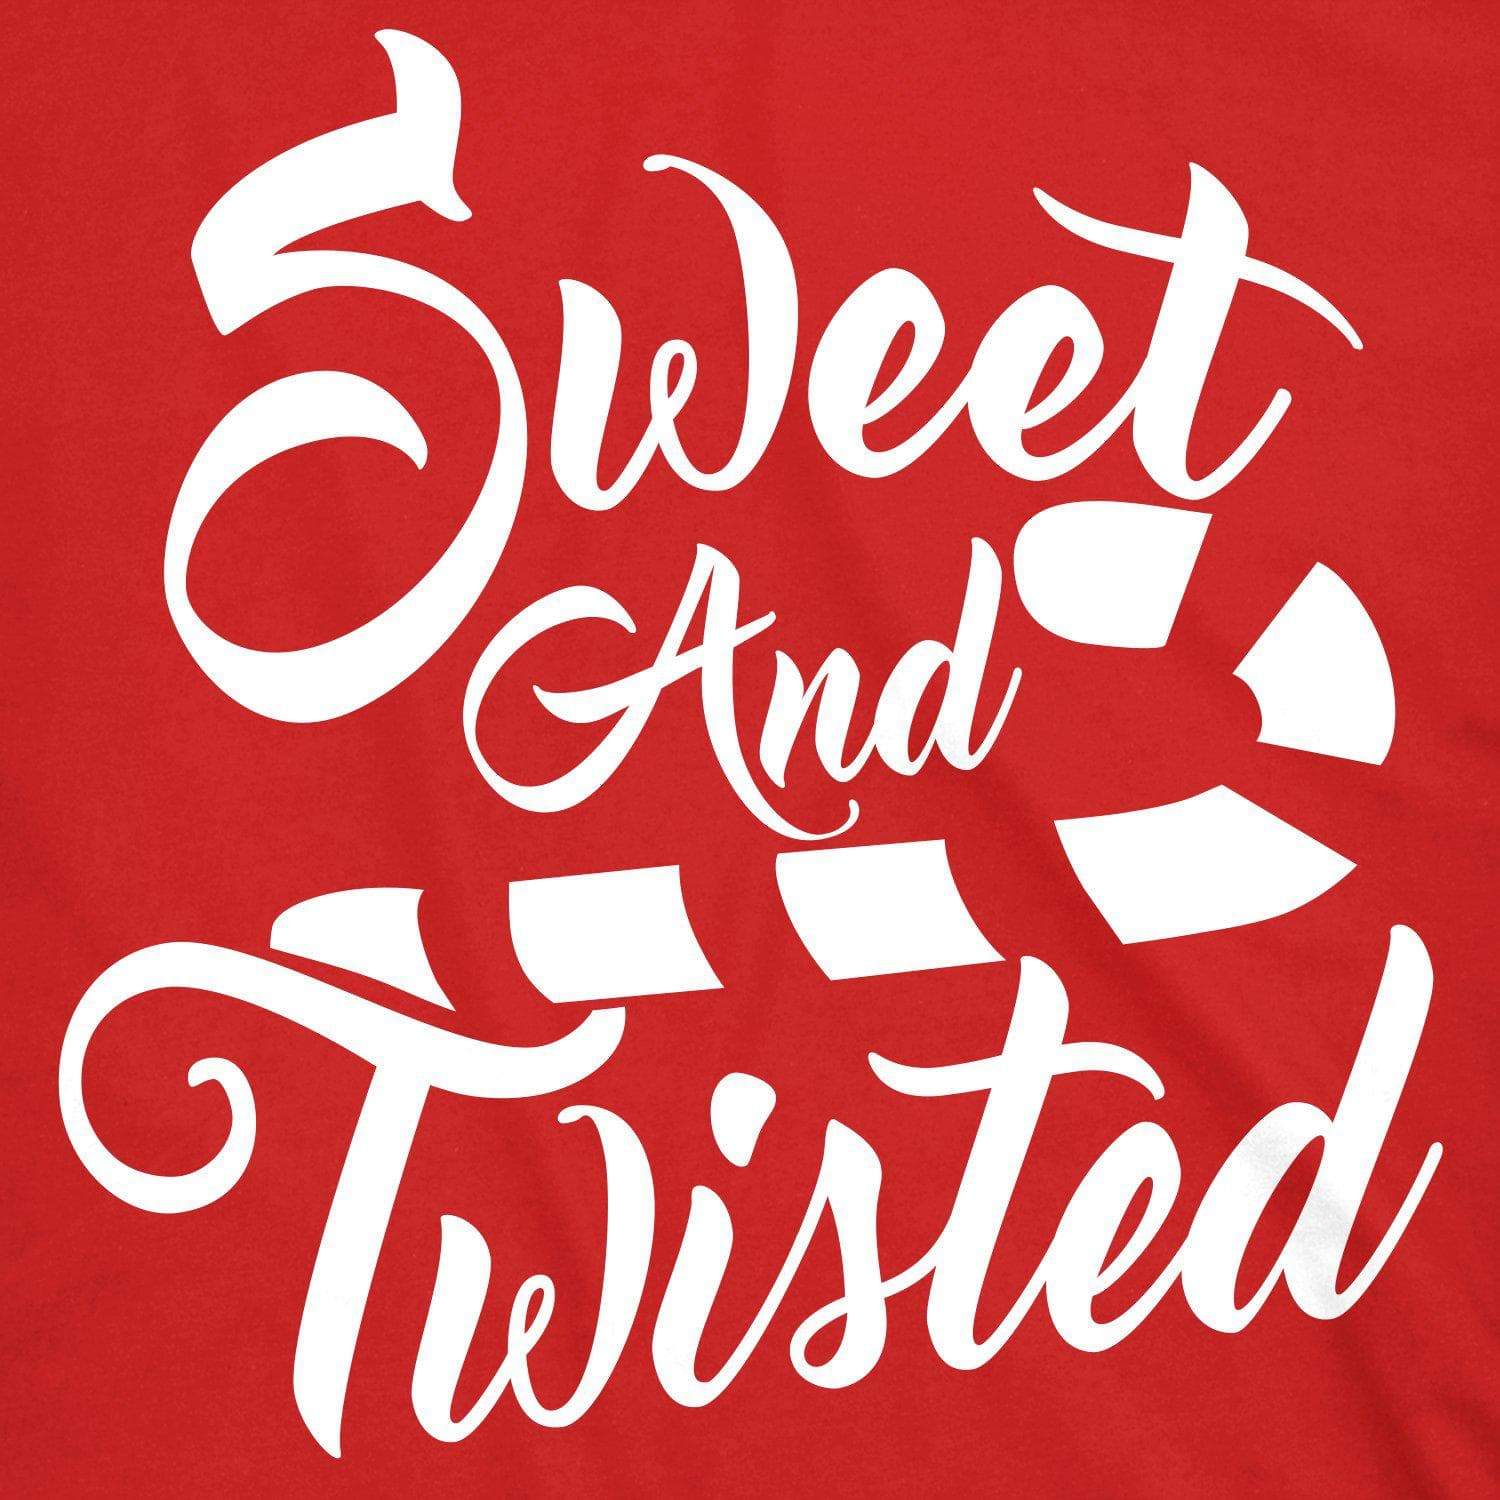 Sweet And Twisted Women's Tshirt - Crazy Dog T-Shirts